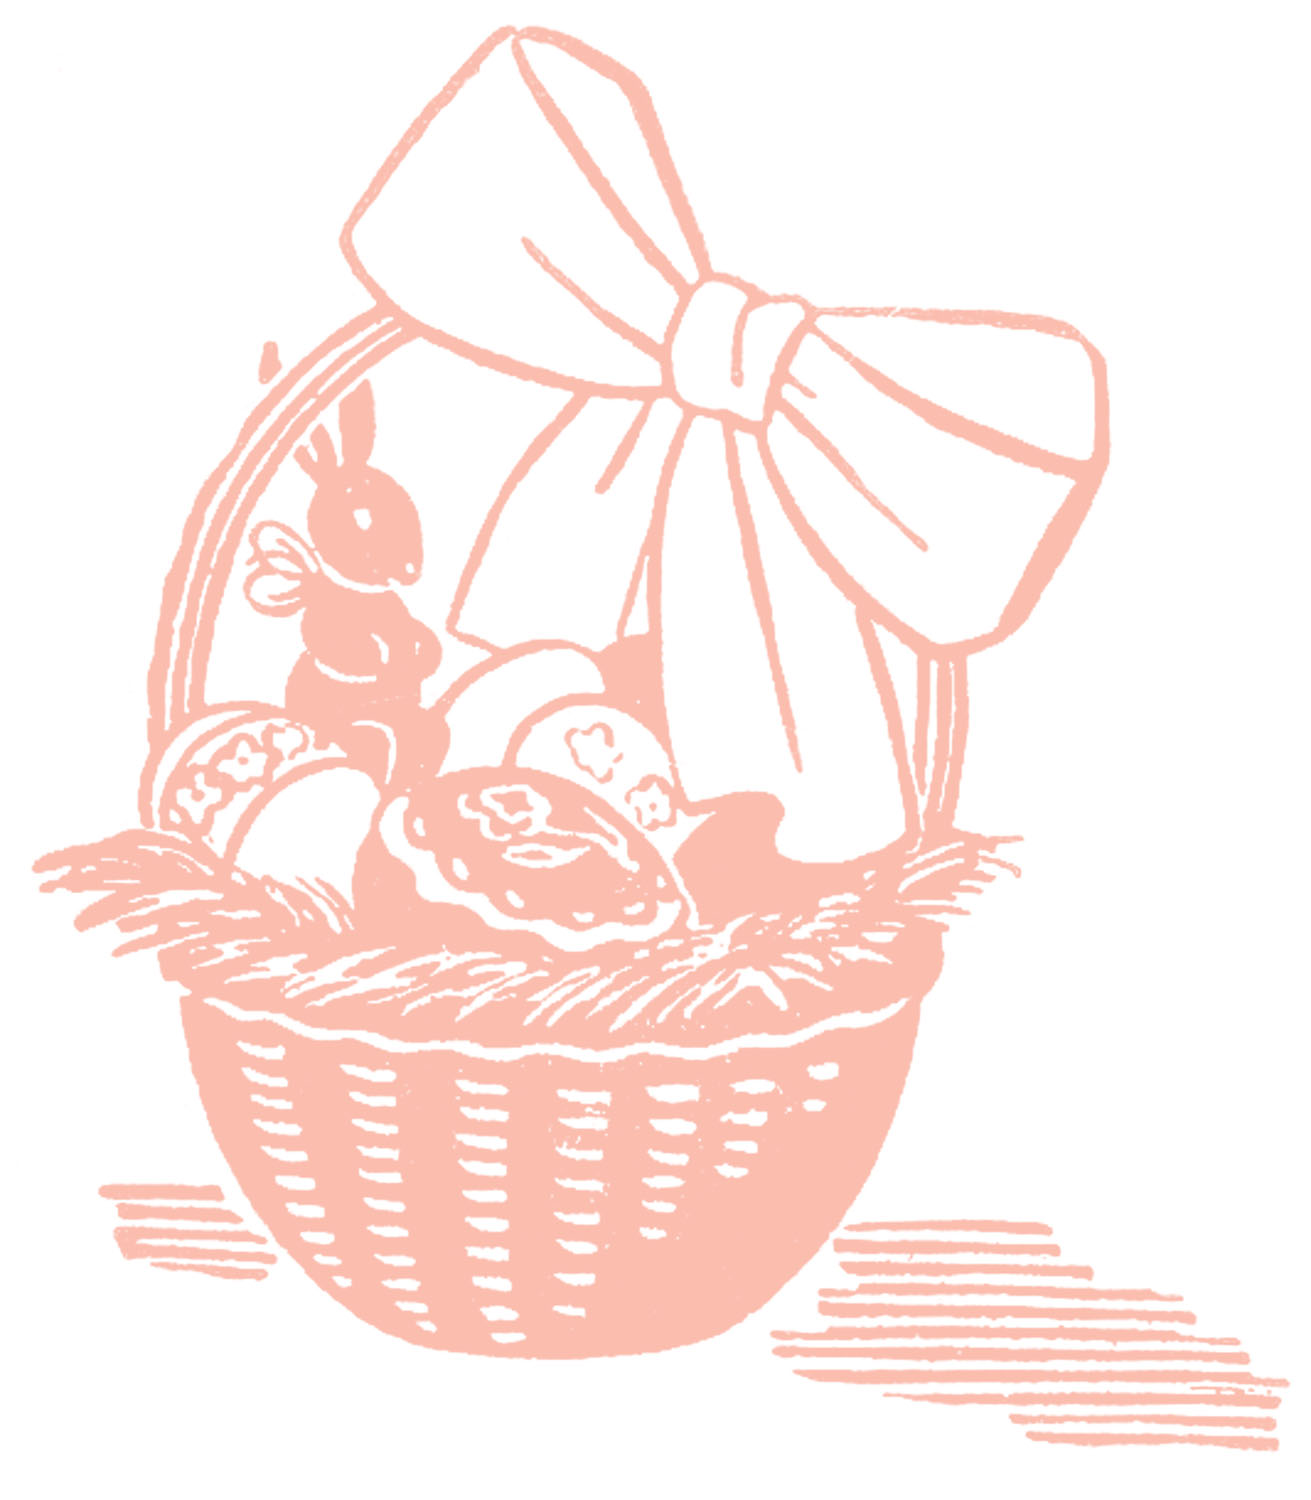 Stock Images - Retro - Easter Baskets - The Graphics Fairy